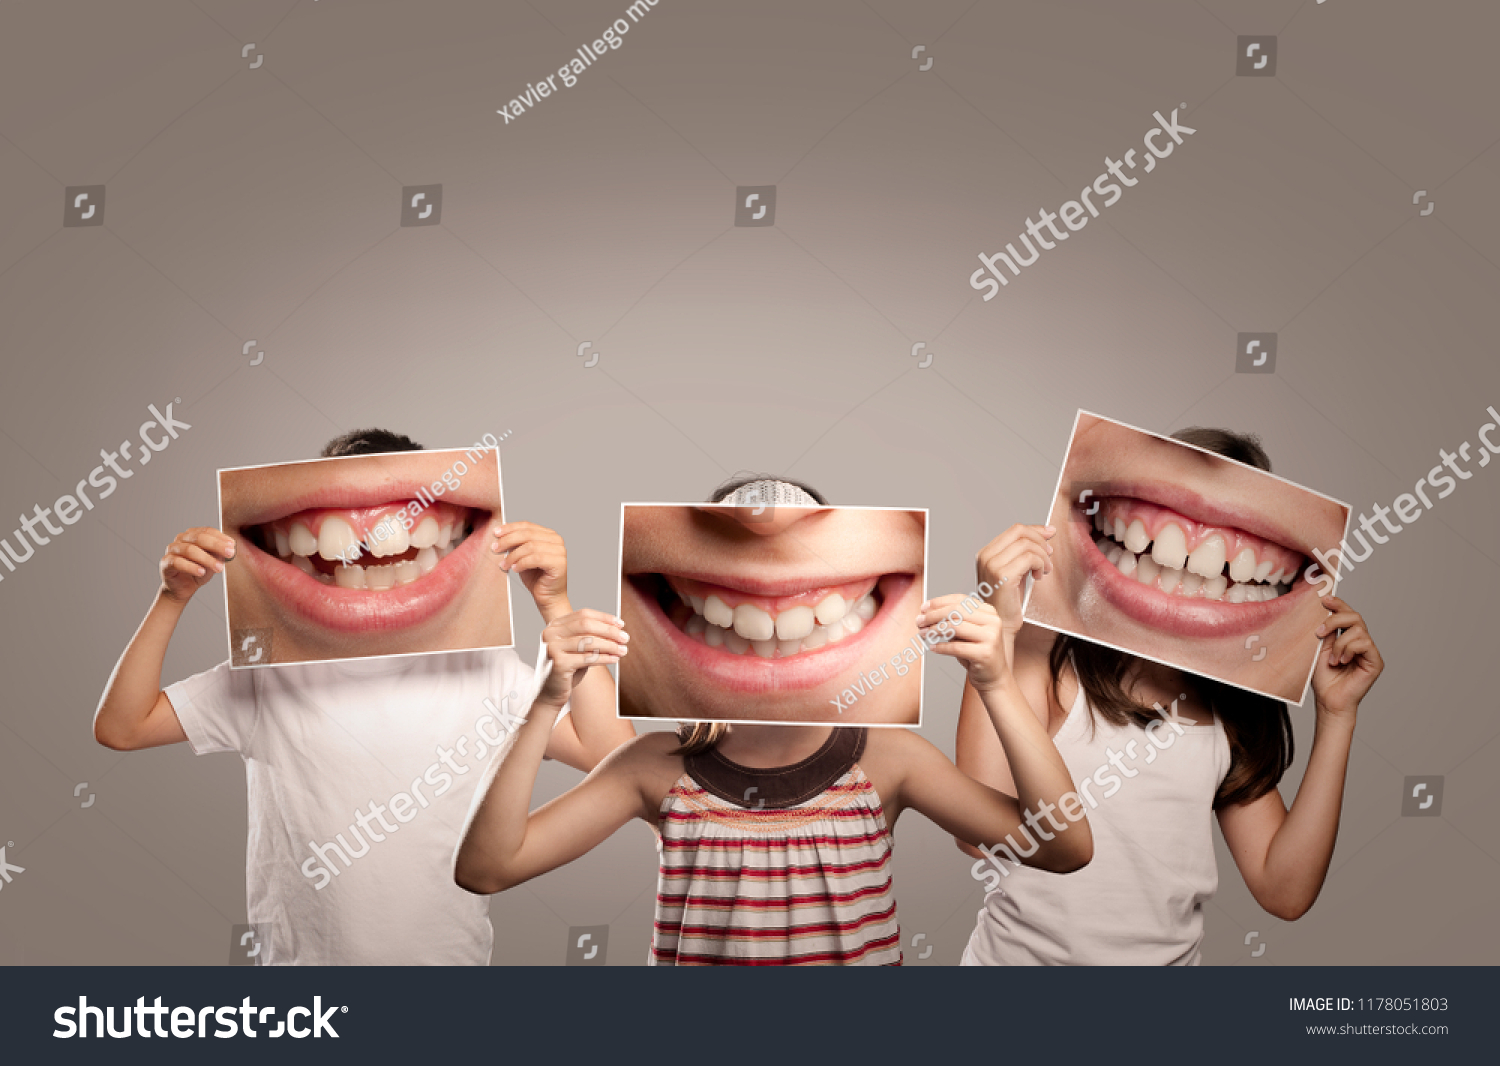 three children holding a picture of a mouth smiling #1178051803